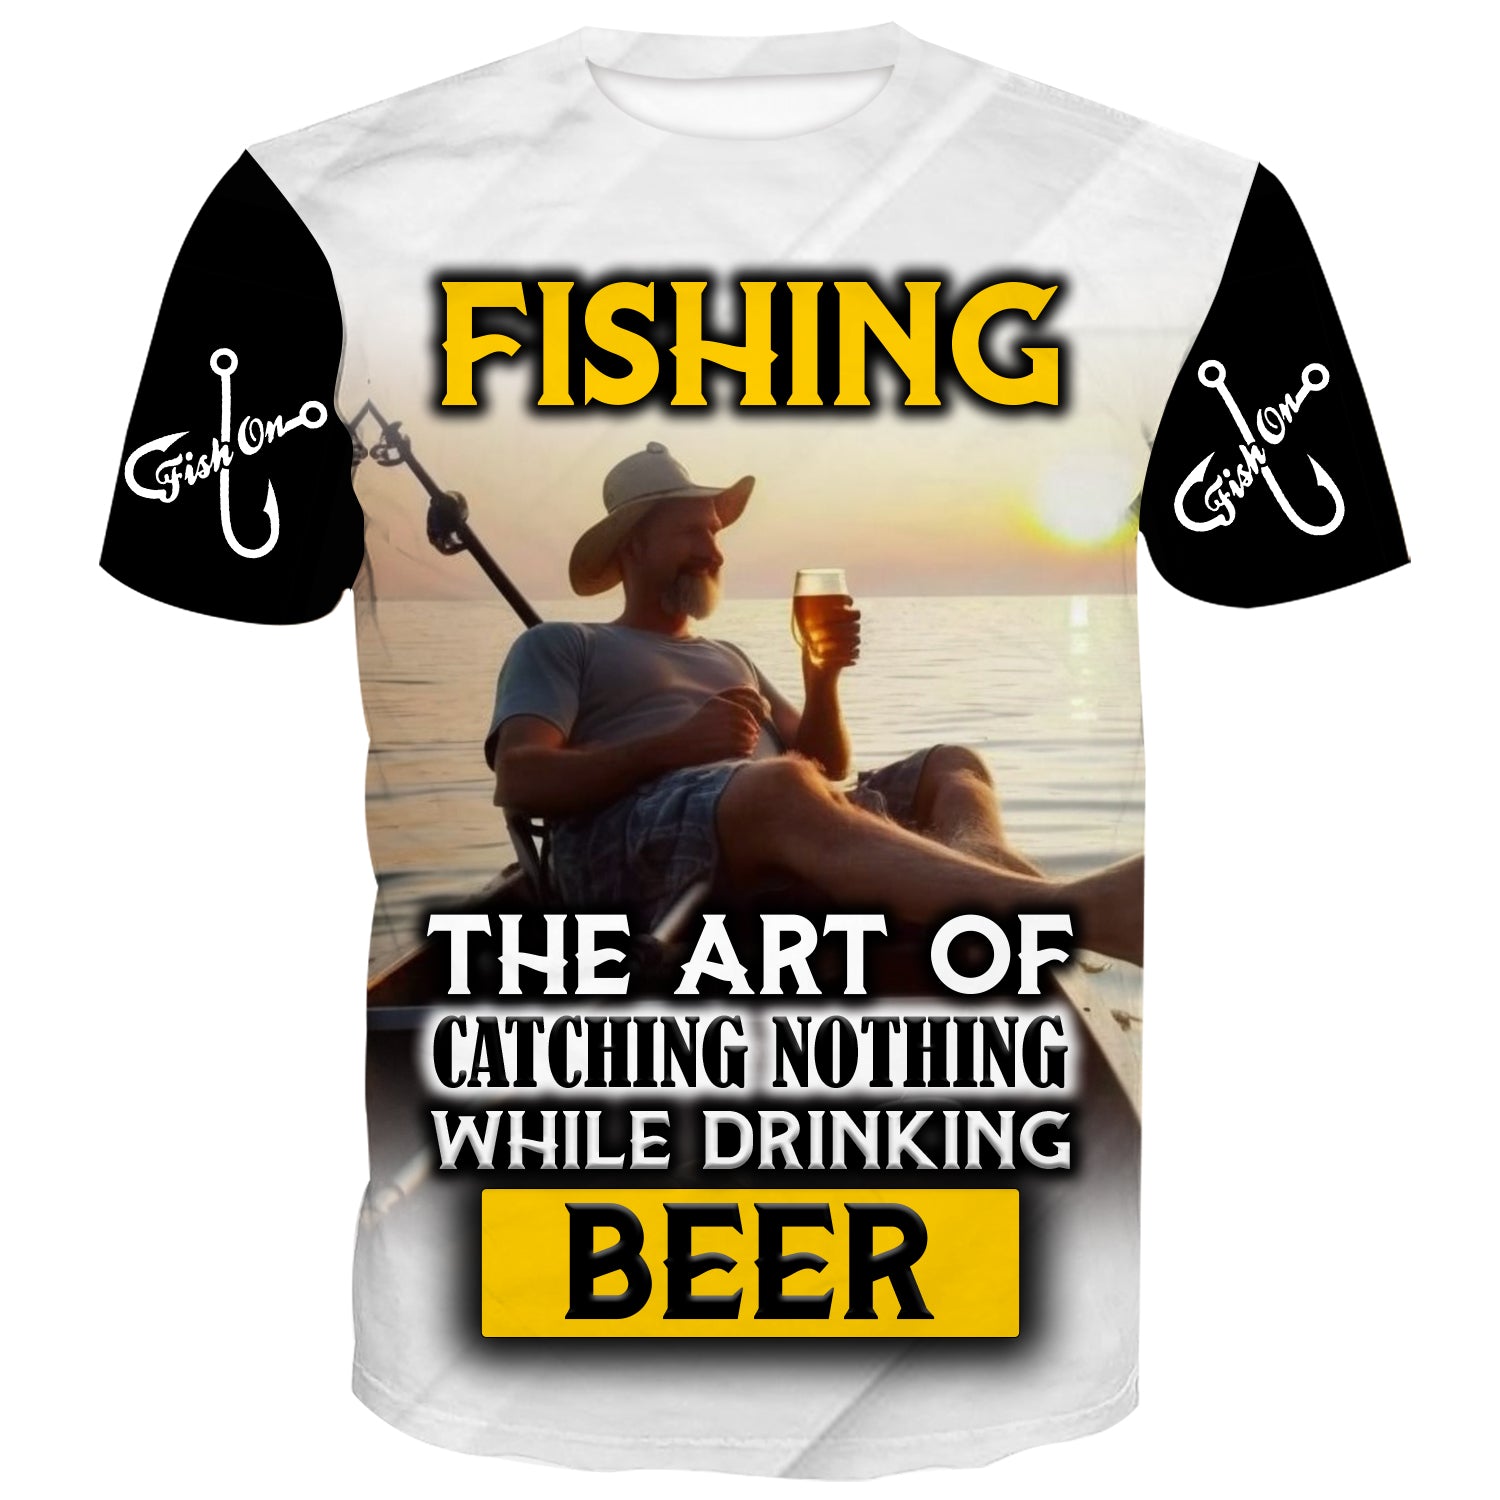 Fishing the art of catching nothing while drinking Beer - T-Shirt